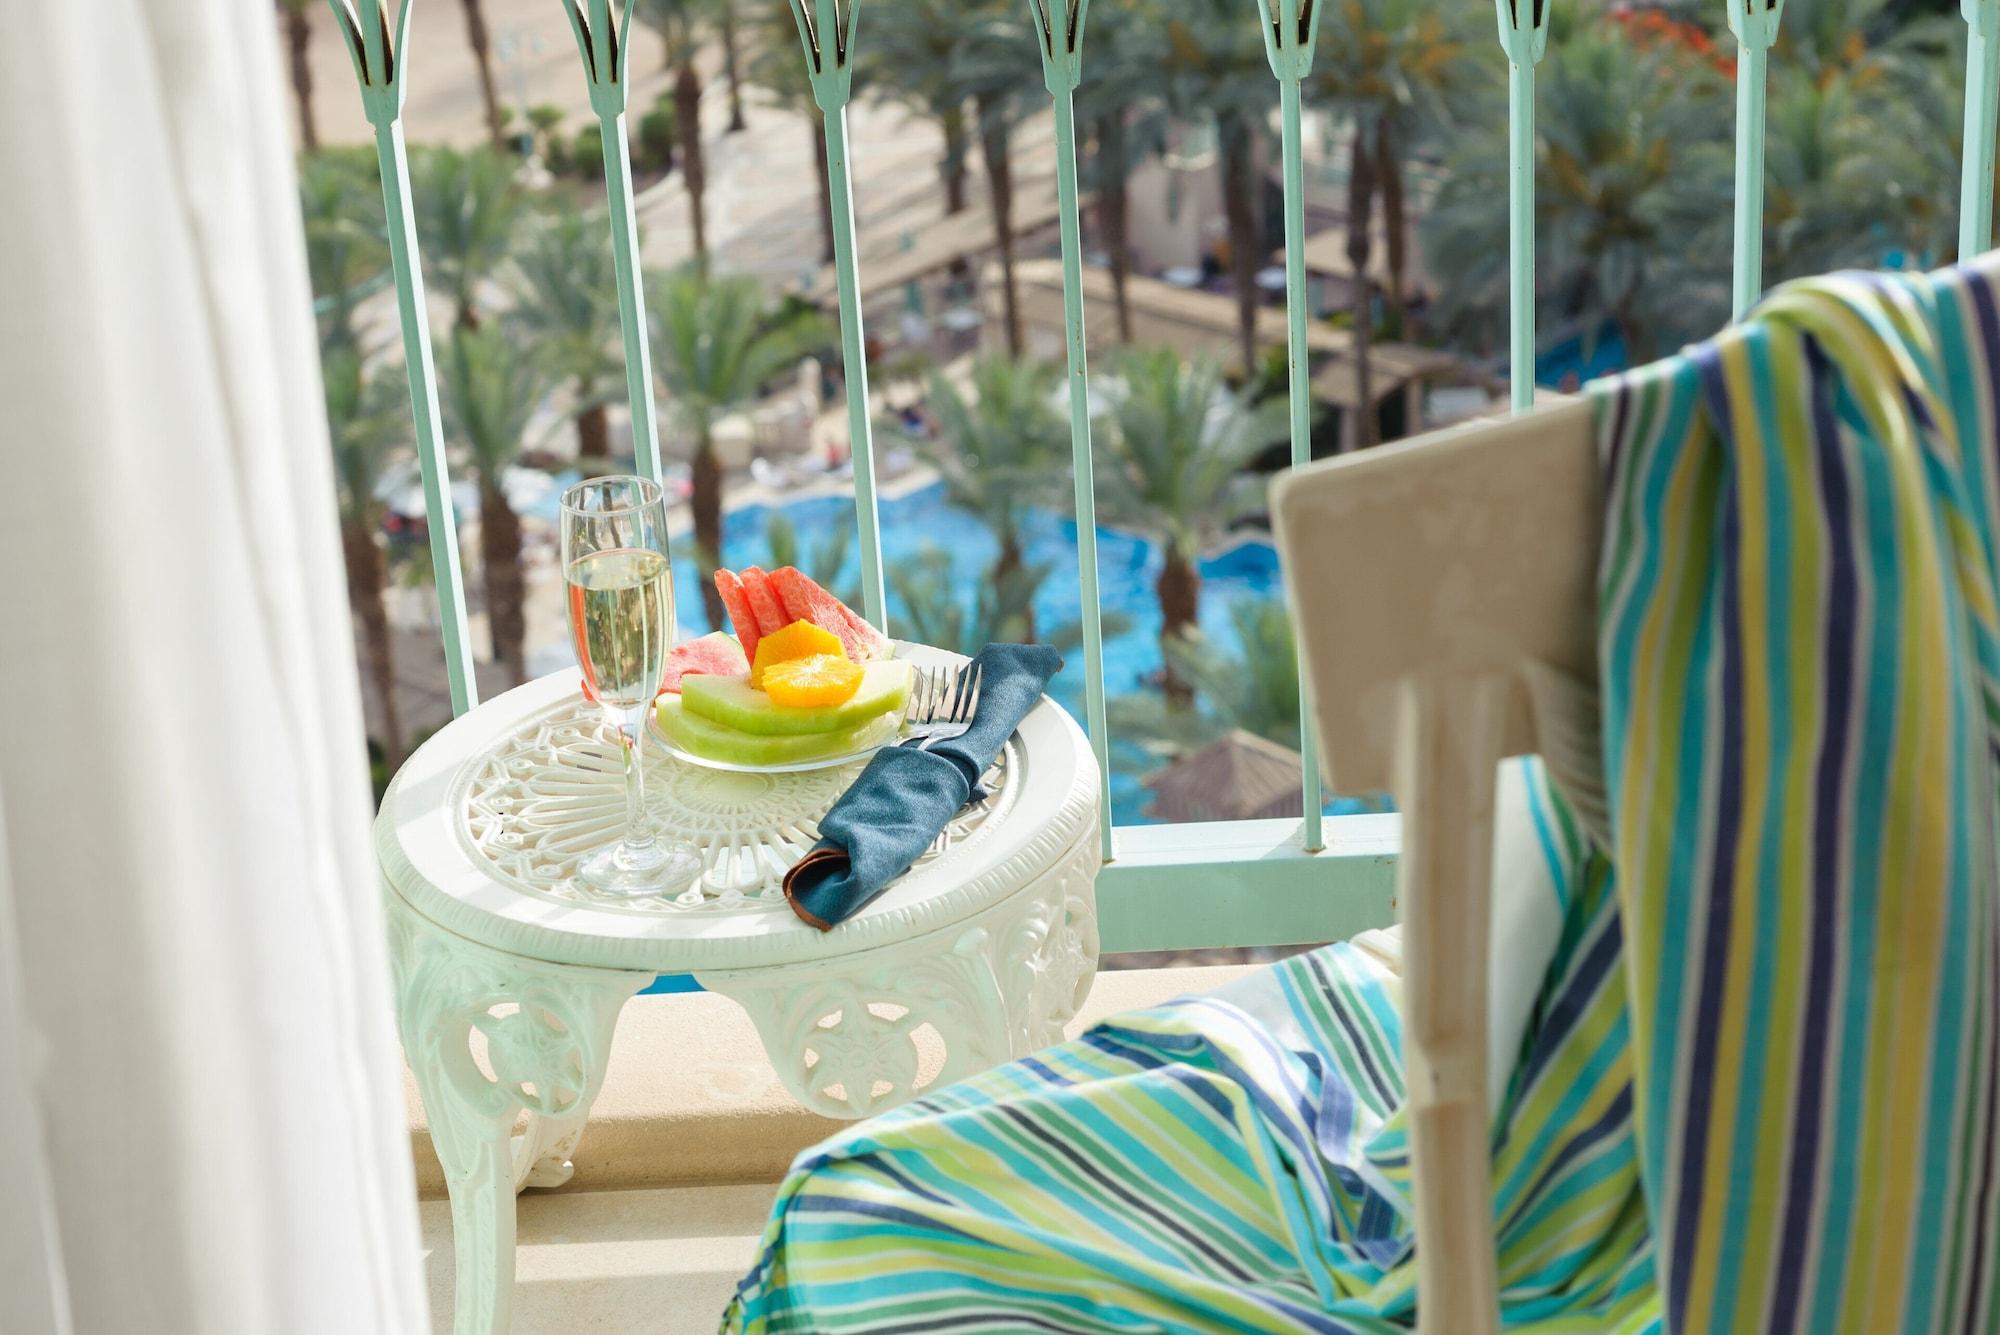 Herods Palace Hotels & Spa Eilat A Premium Collection By Fattal Hotels エクステリア 写真